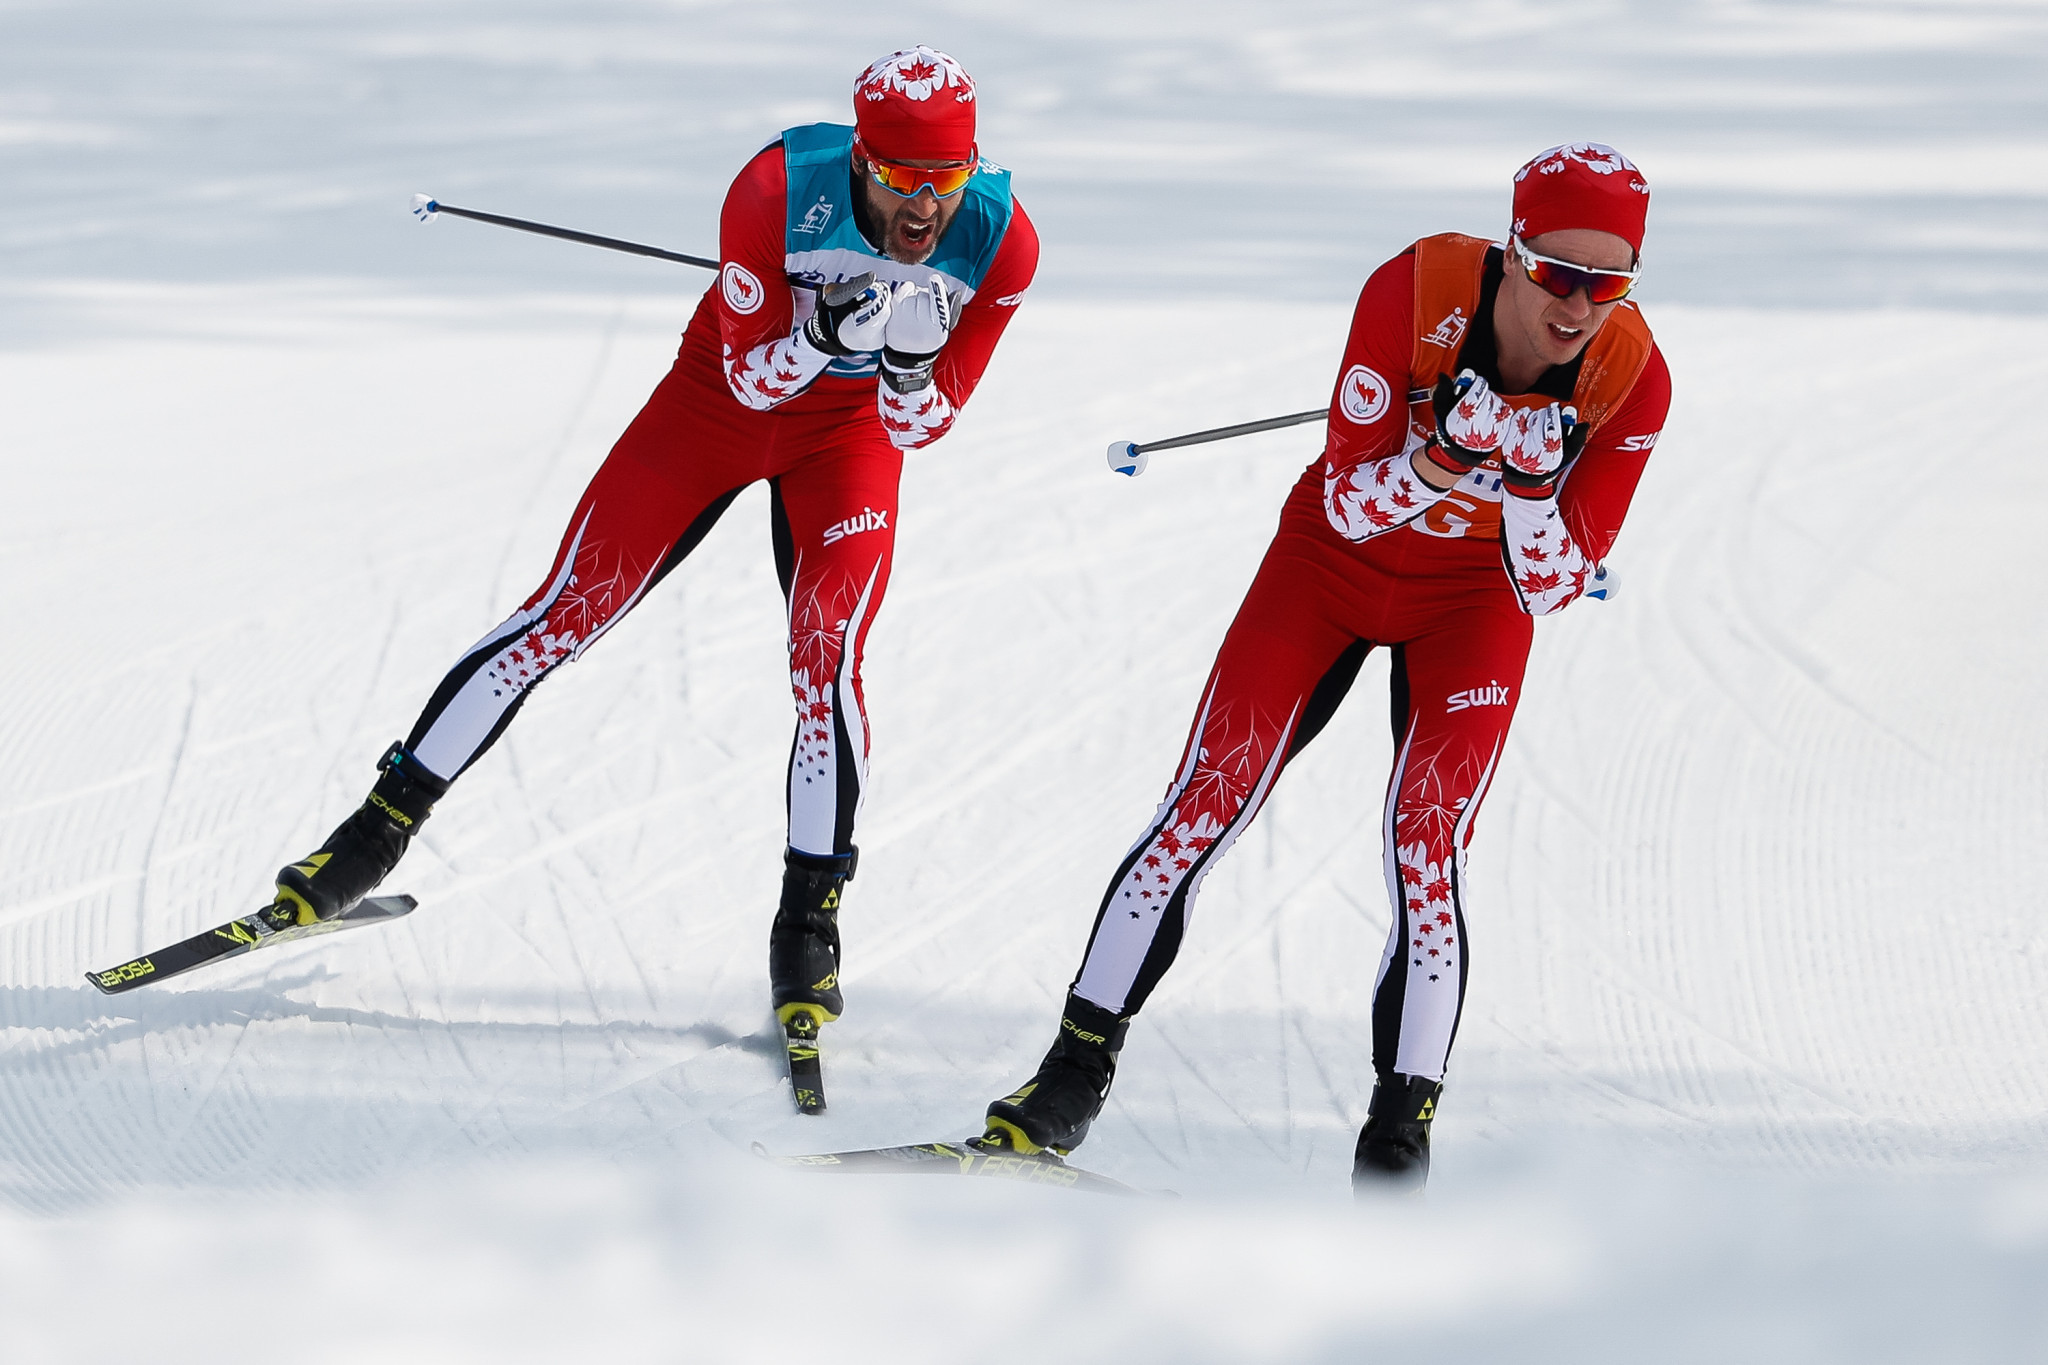 Visually-impaired cross-country skier Brian McKeever won his 14th Paralympic gold medal as Canada finished second on the medals table ©Getty Images